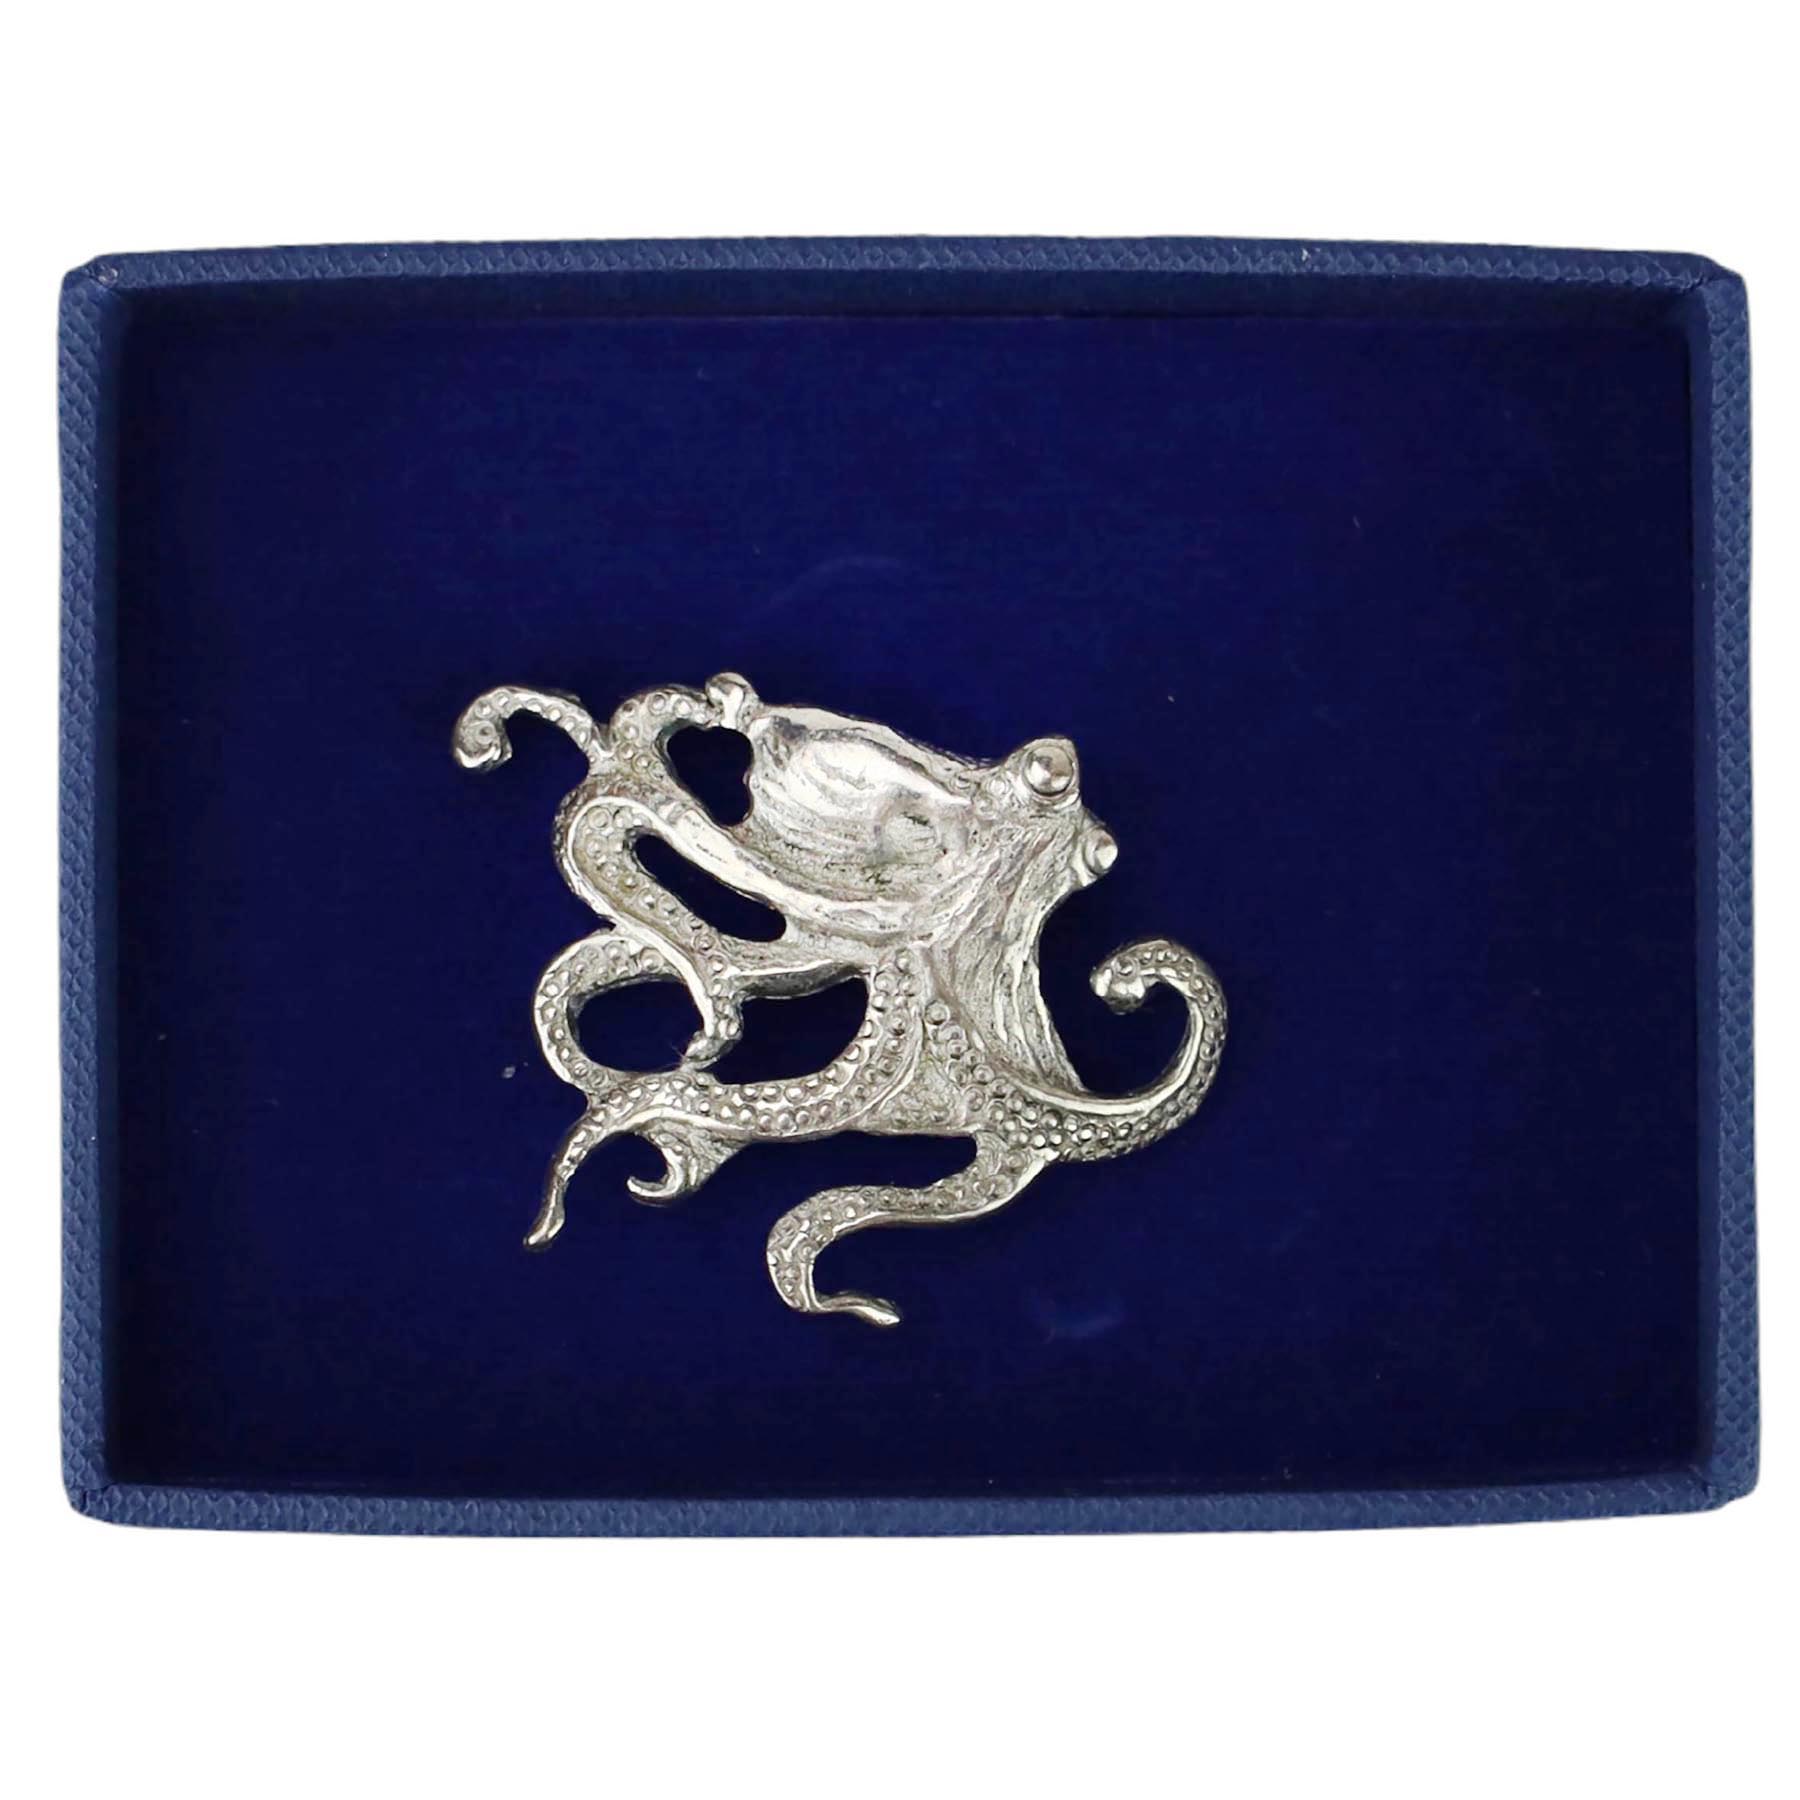 Pewter Octopus Candle Pin shown in the Navy box that it comes in